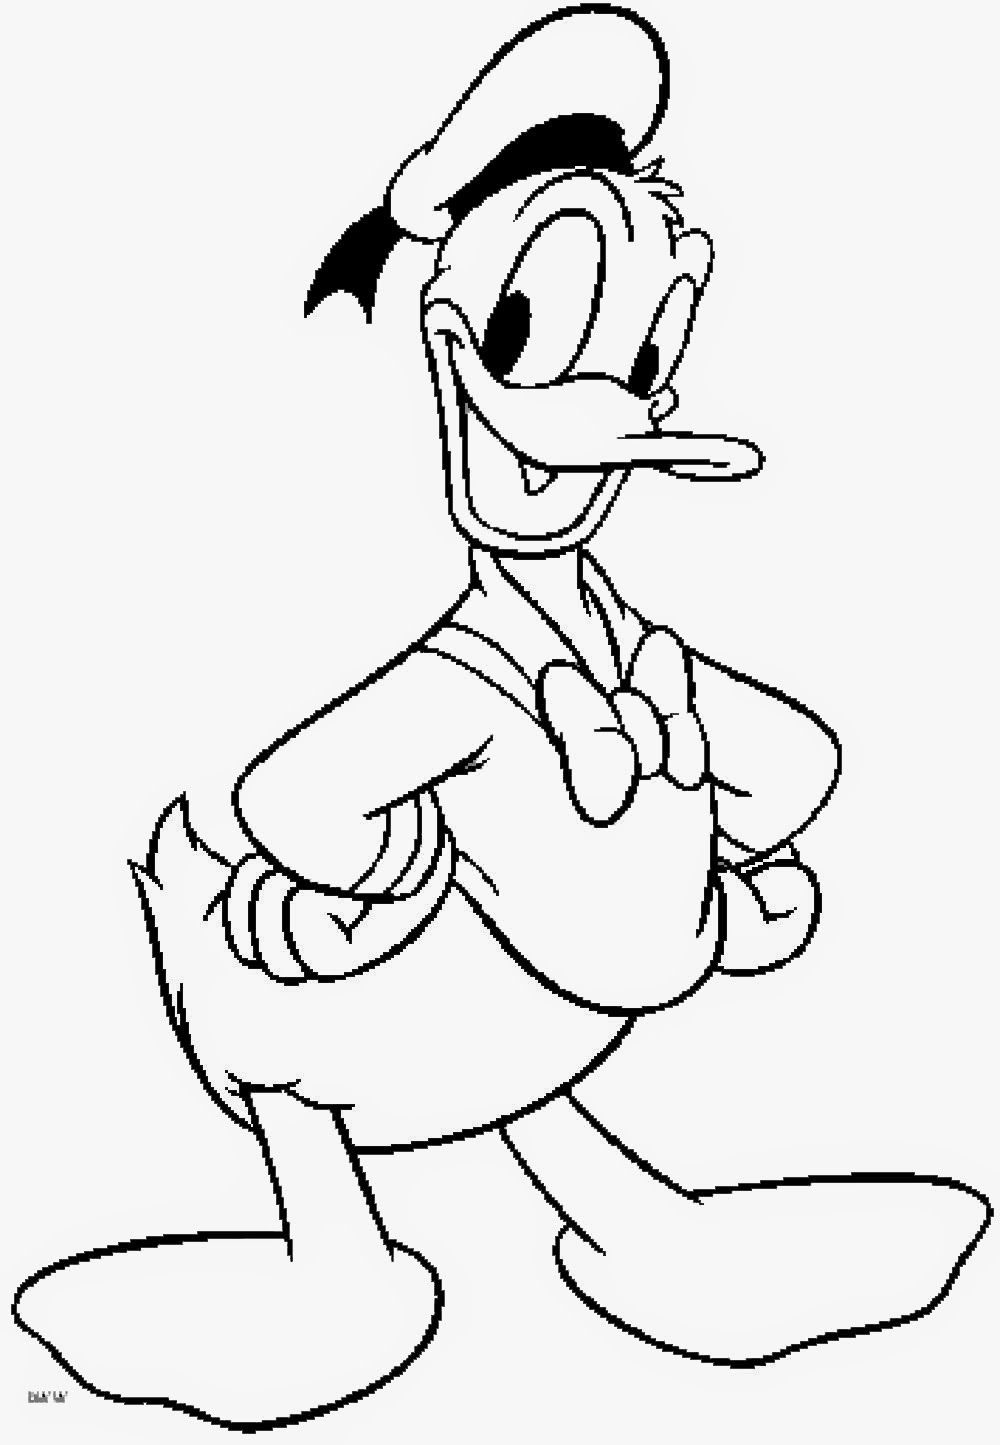 Coloring Blog for Kids: Donald Duck Coloring pages